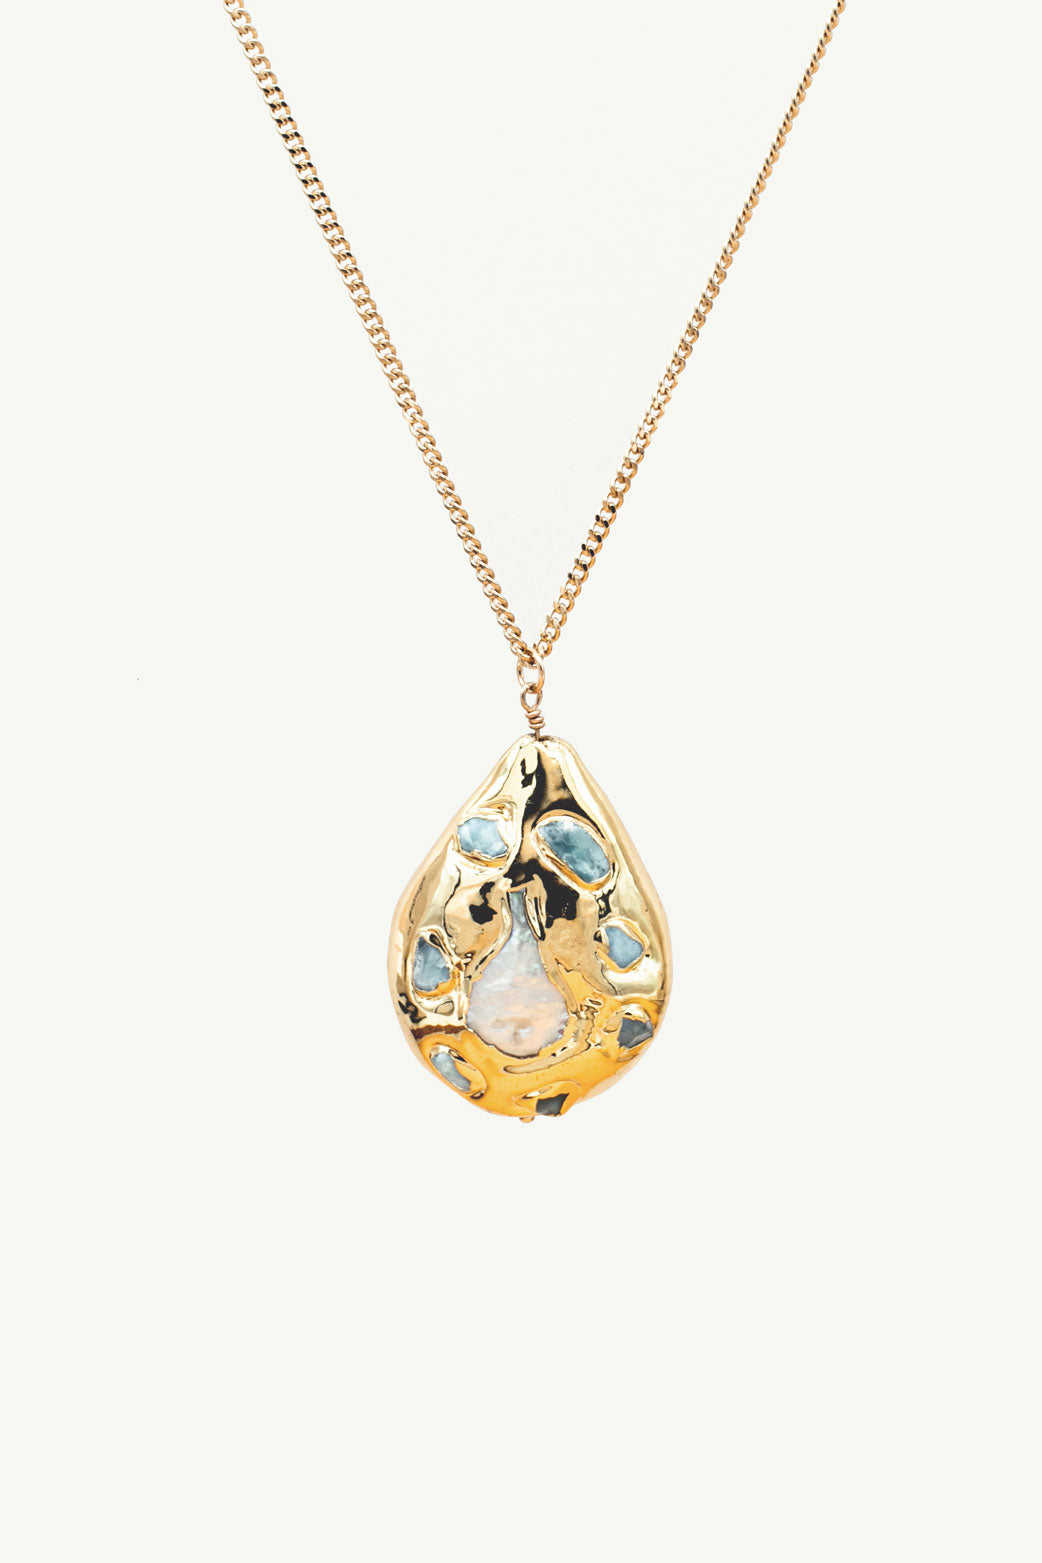 Gold pendant with a pearl in the center and aquamarines around the pearl.